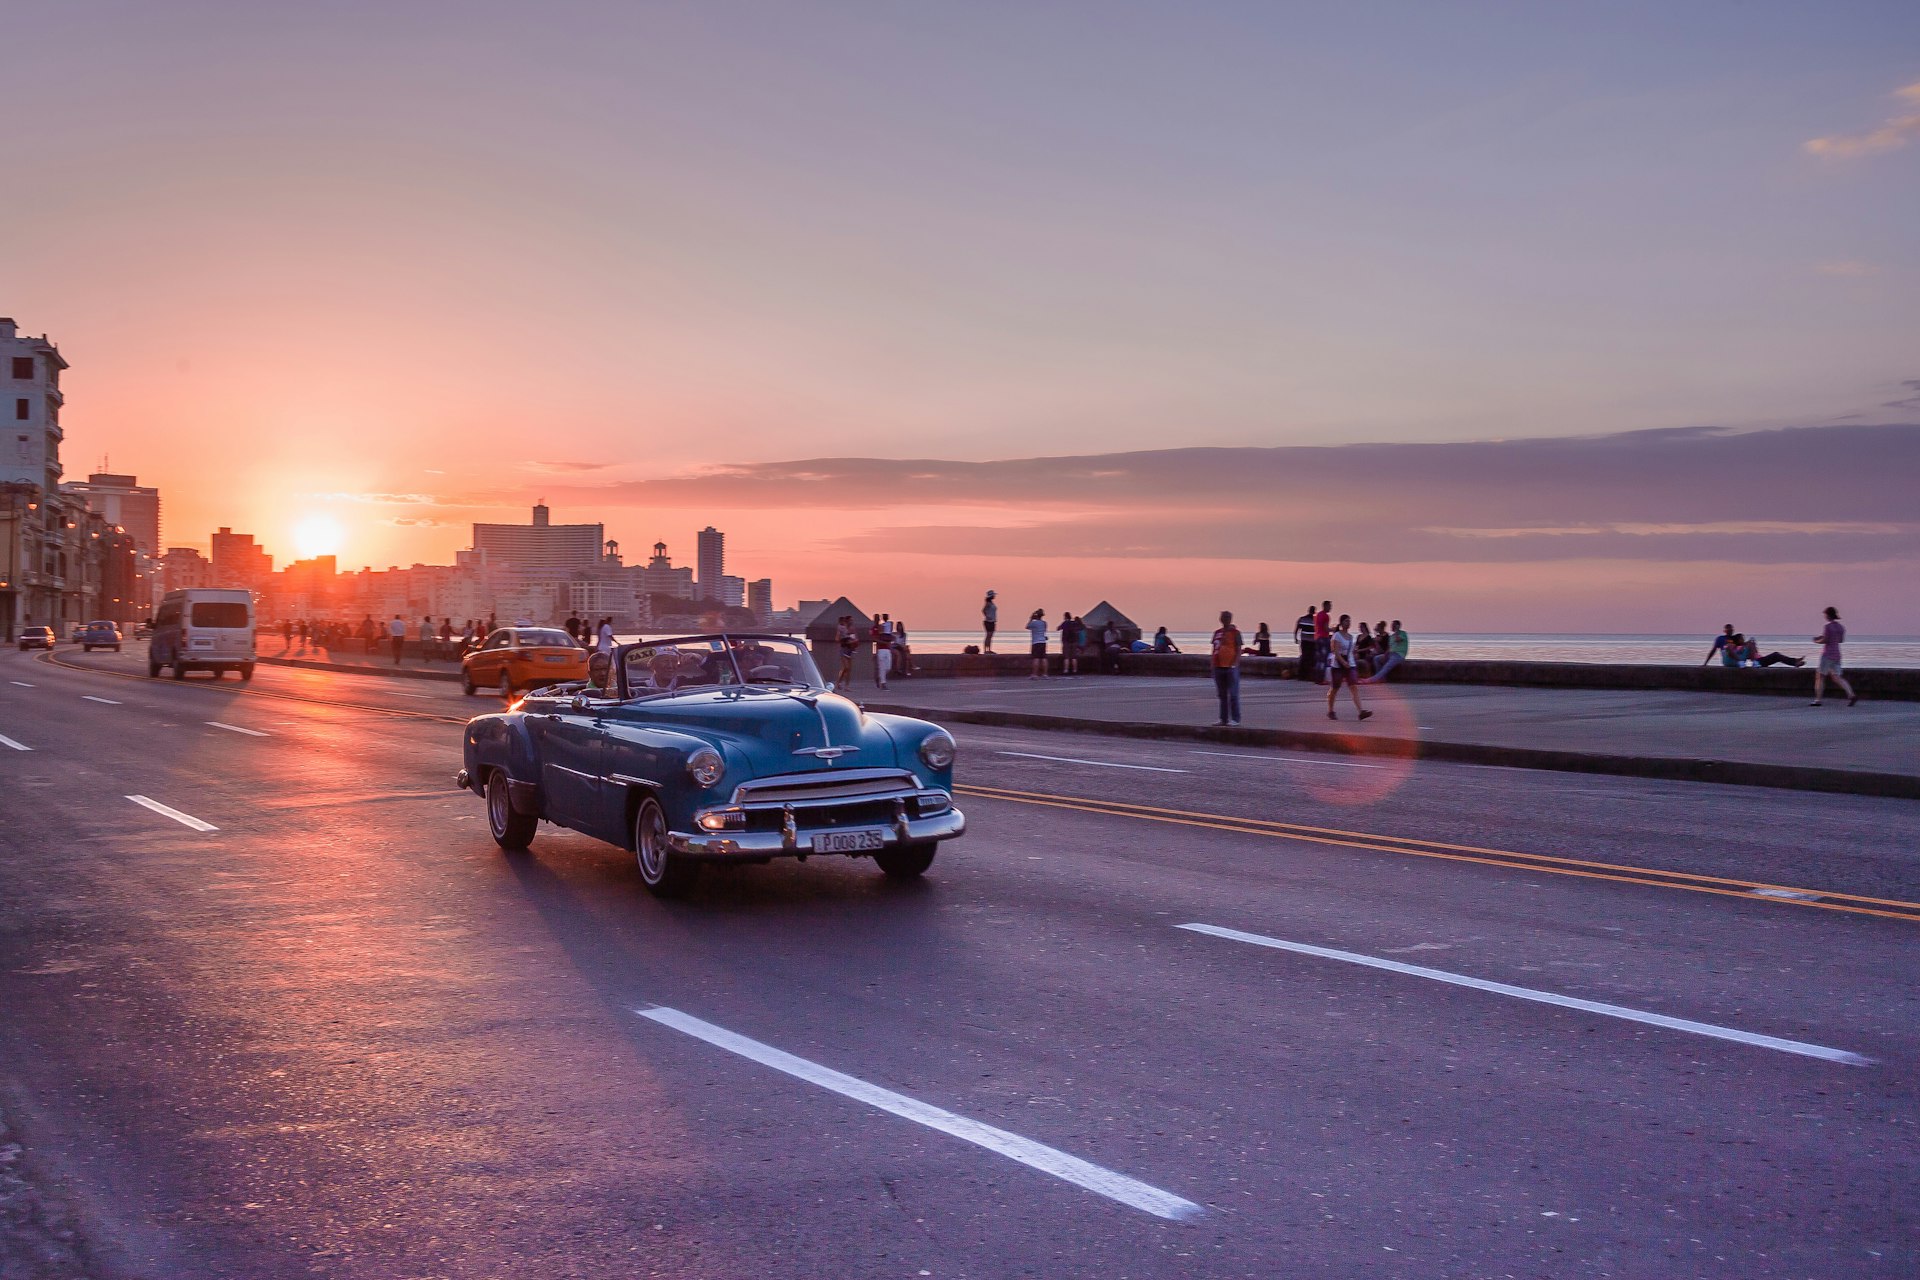 Sunset on El Malecon at the seaside while an oltimer taxi passes by. The street view of Havana is changing slowly with modern and old cars mixing on the road.